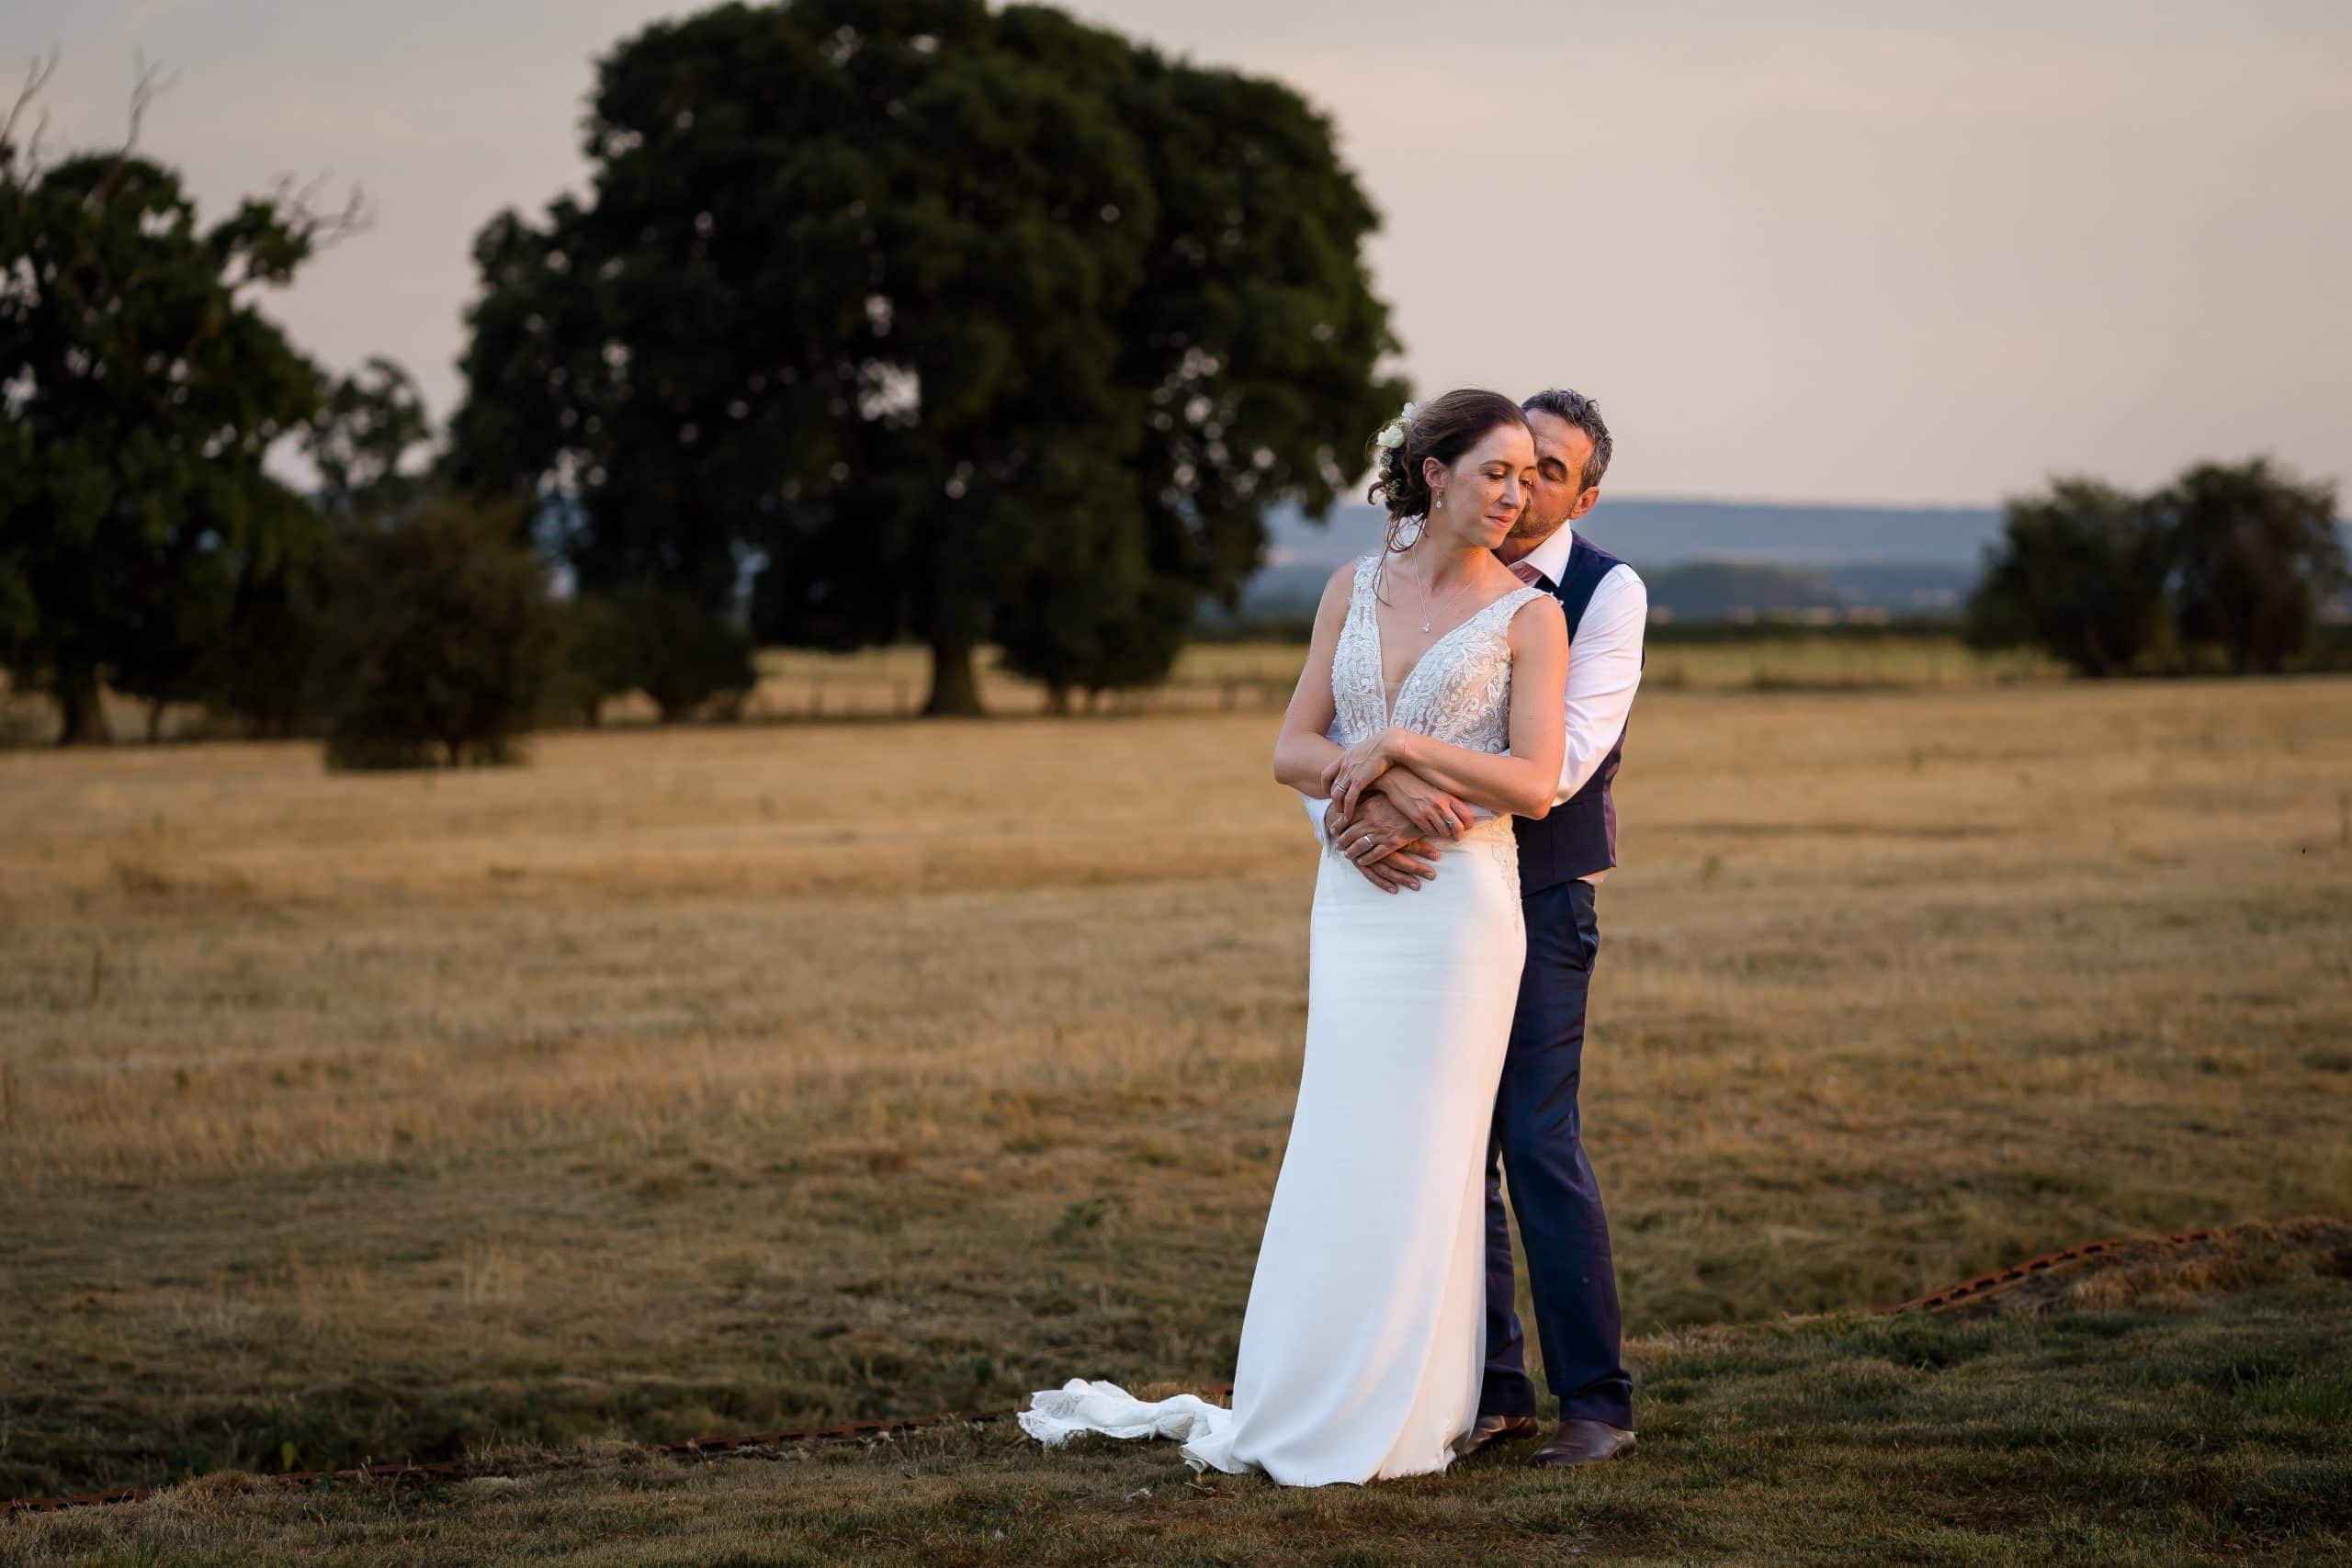 bride-and-groom-holding-each-other-in-grass-field